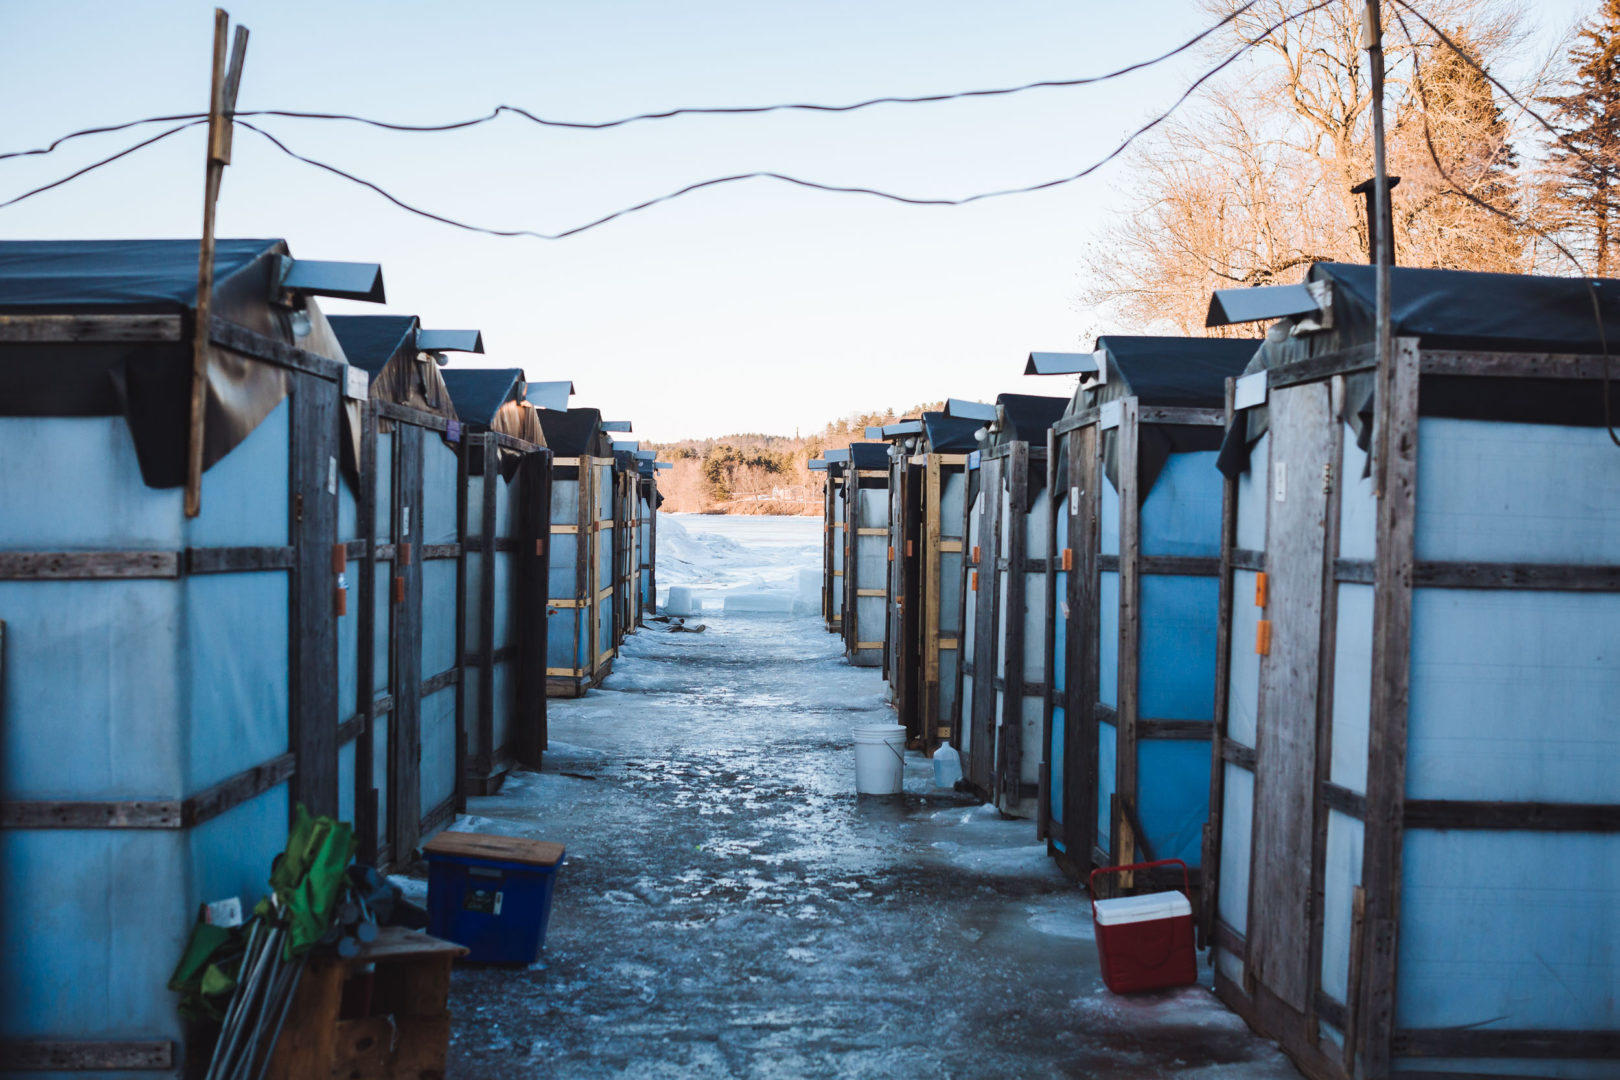 Smelting shacks lined up on the ice of a frozen lake in Maine